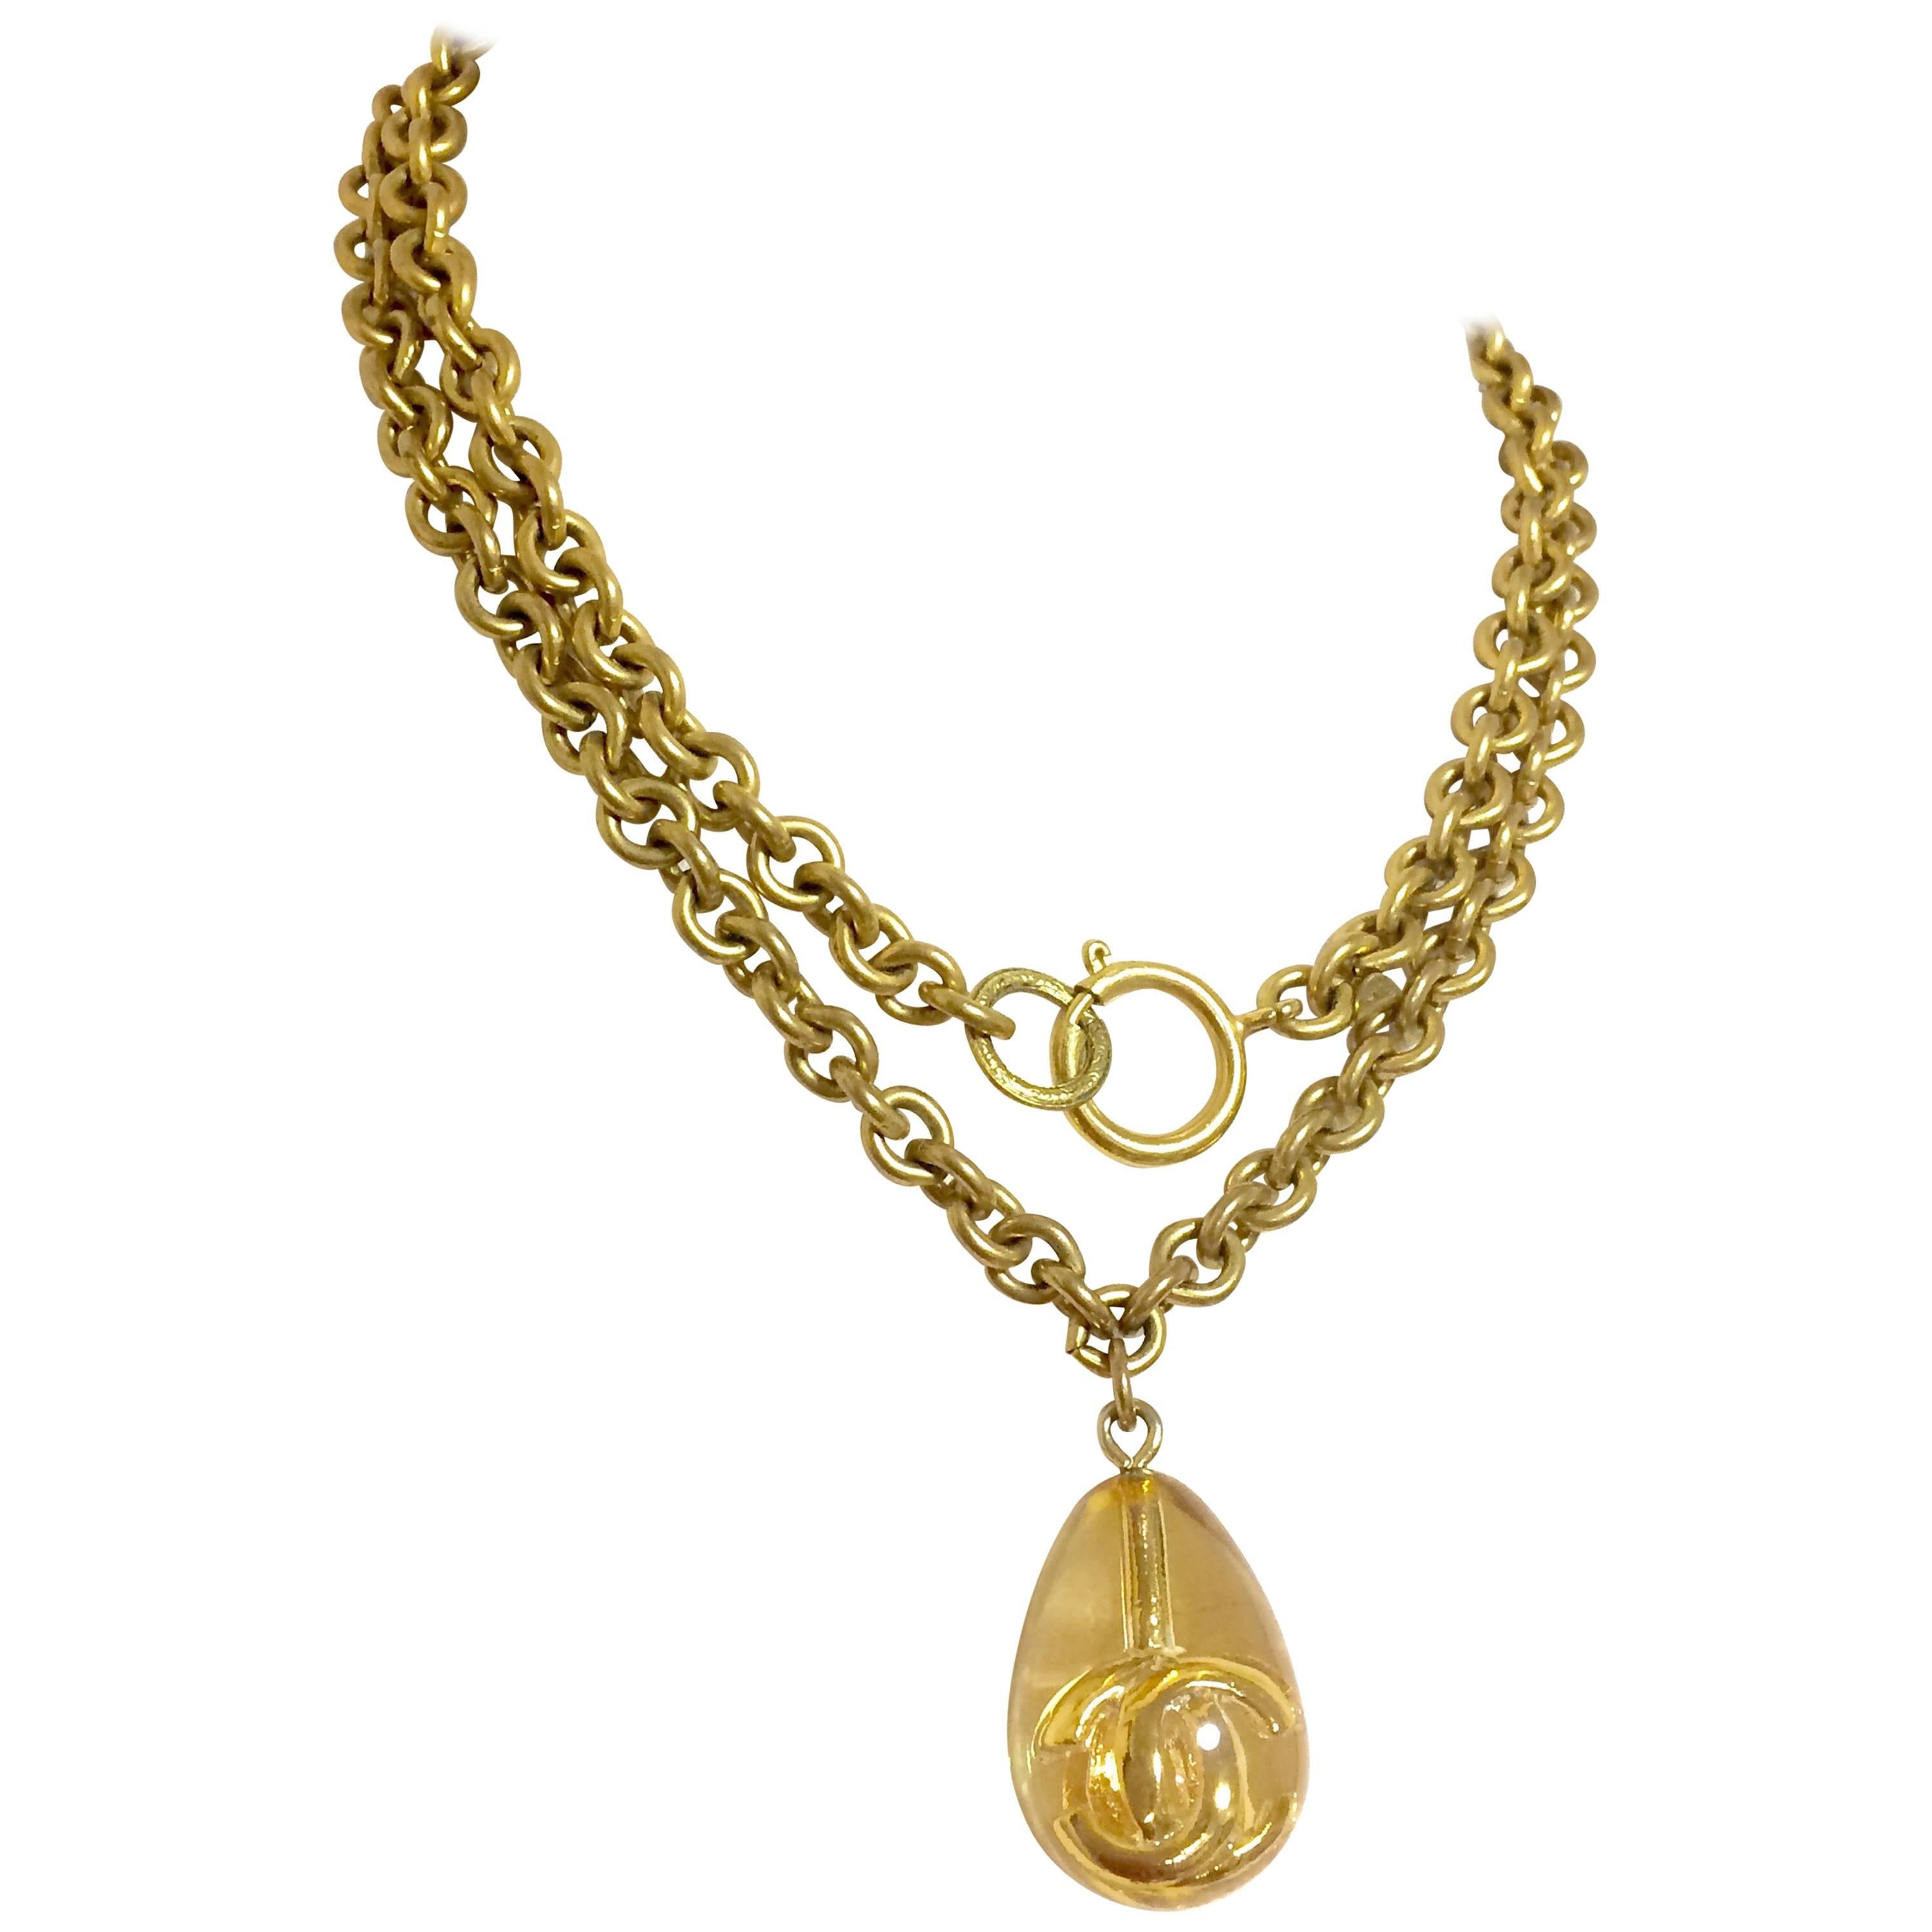 Vintage CHANEL long chain necklace with clear and gold teardrop CC pendant top. For Sale